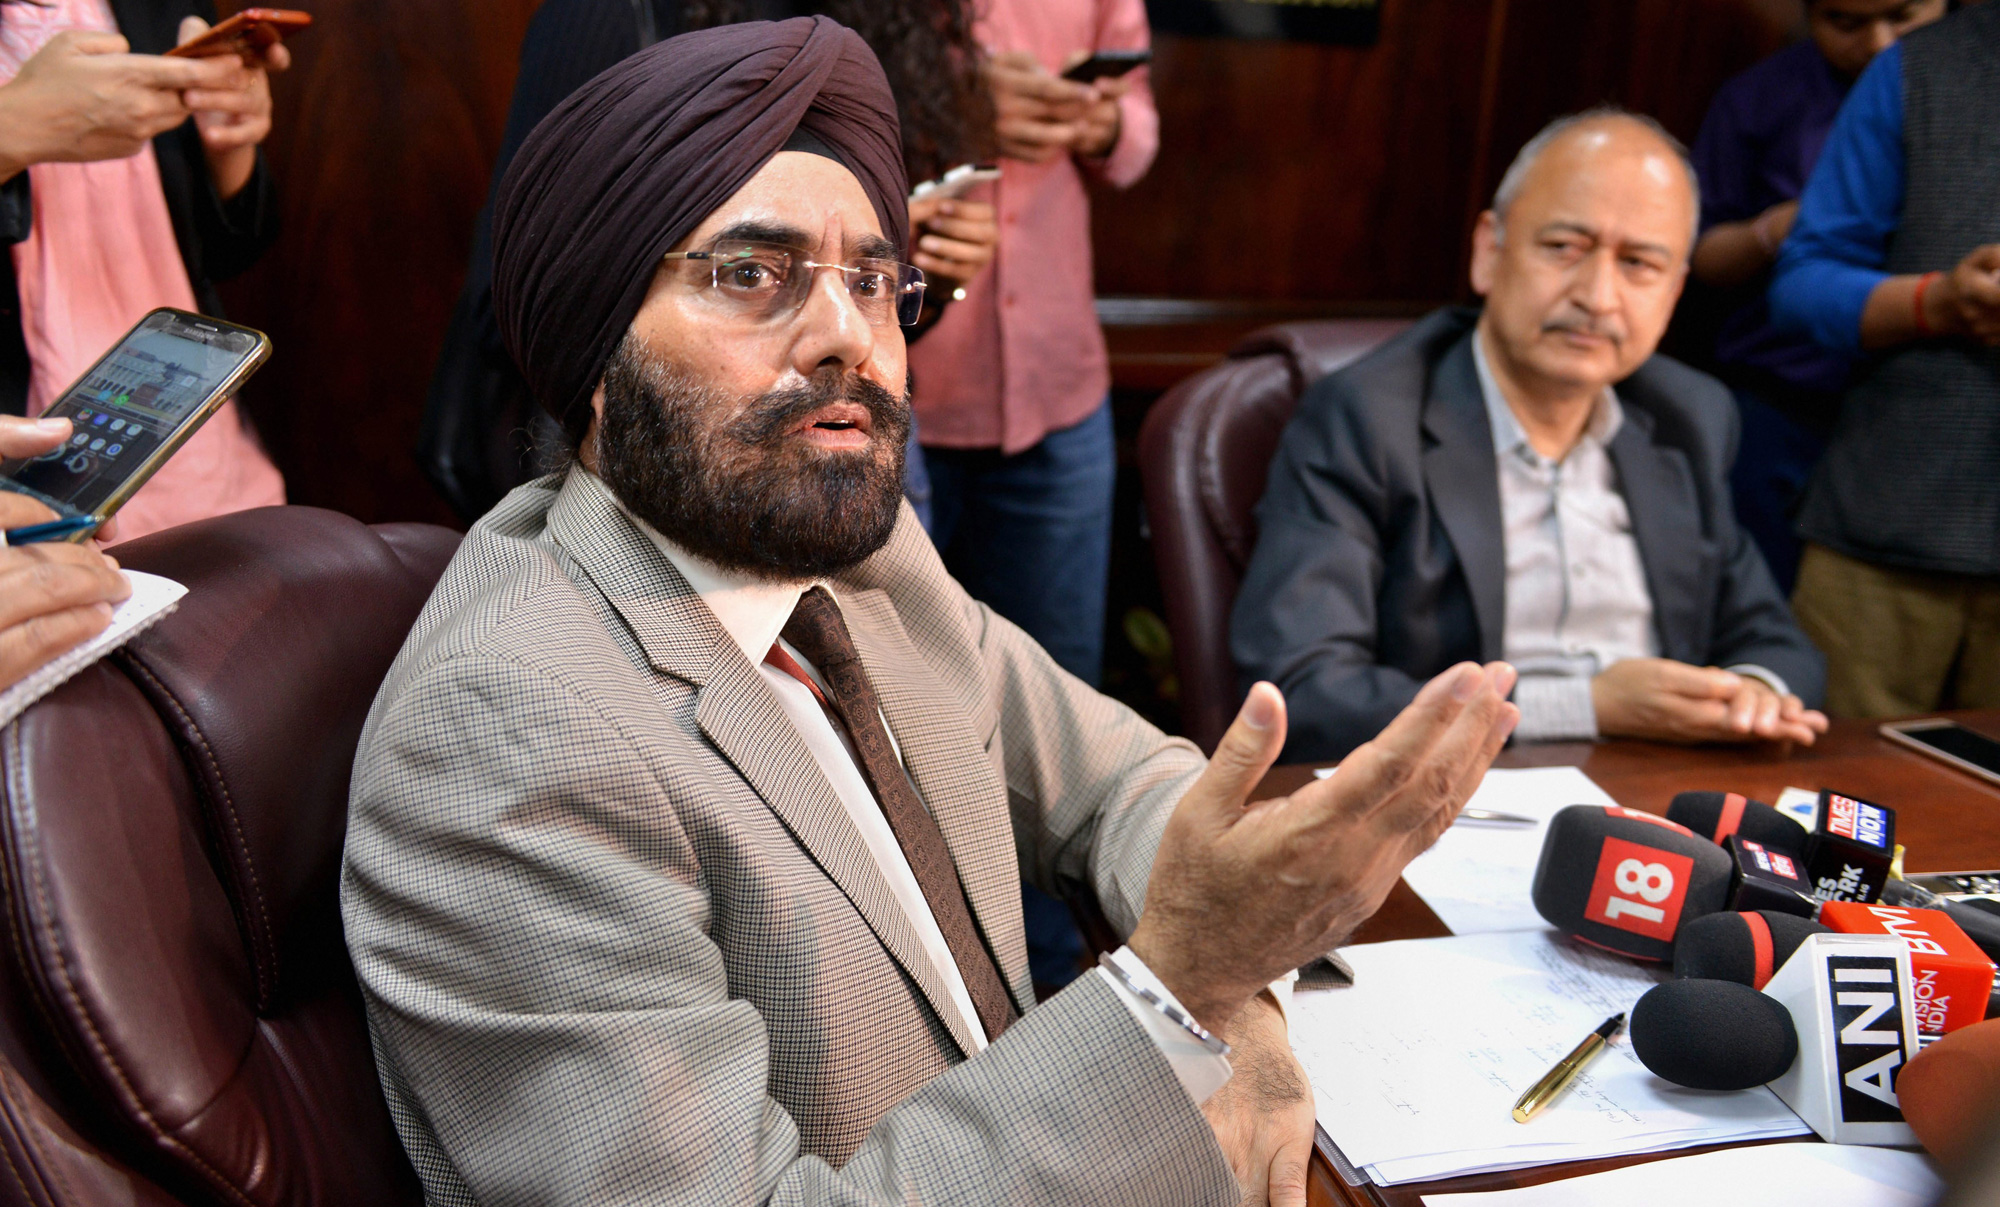 DGCA B.S. Bhullar addresses the media, as Civil Aviation Secretary Pradeep Singh Kharola looks on, after an all-airlines meeting to discuss the impact of ban on Boeing 737 Max aircrafts, in New Delhi on Wednesday, March 13, 2019. 